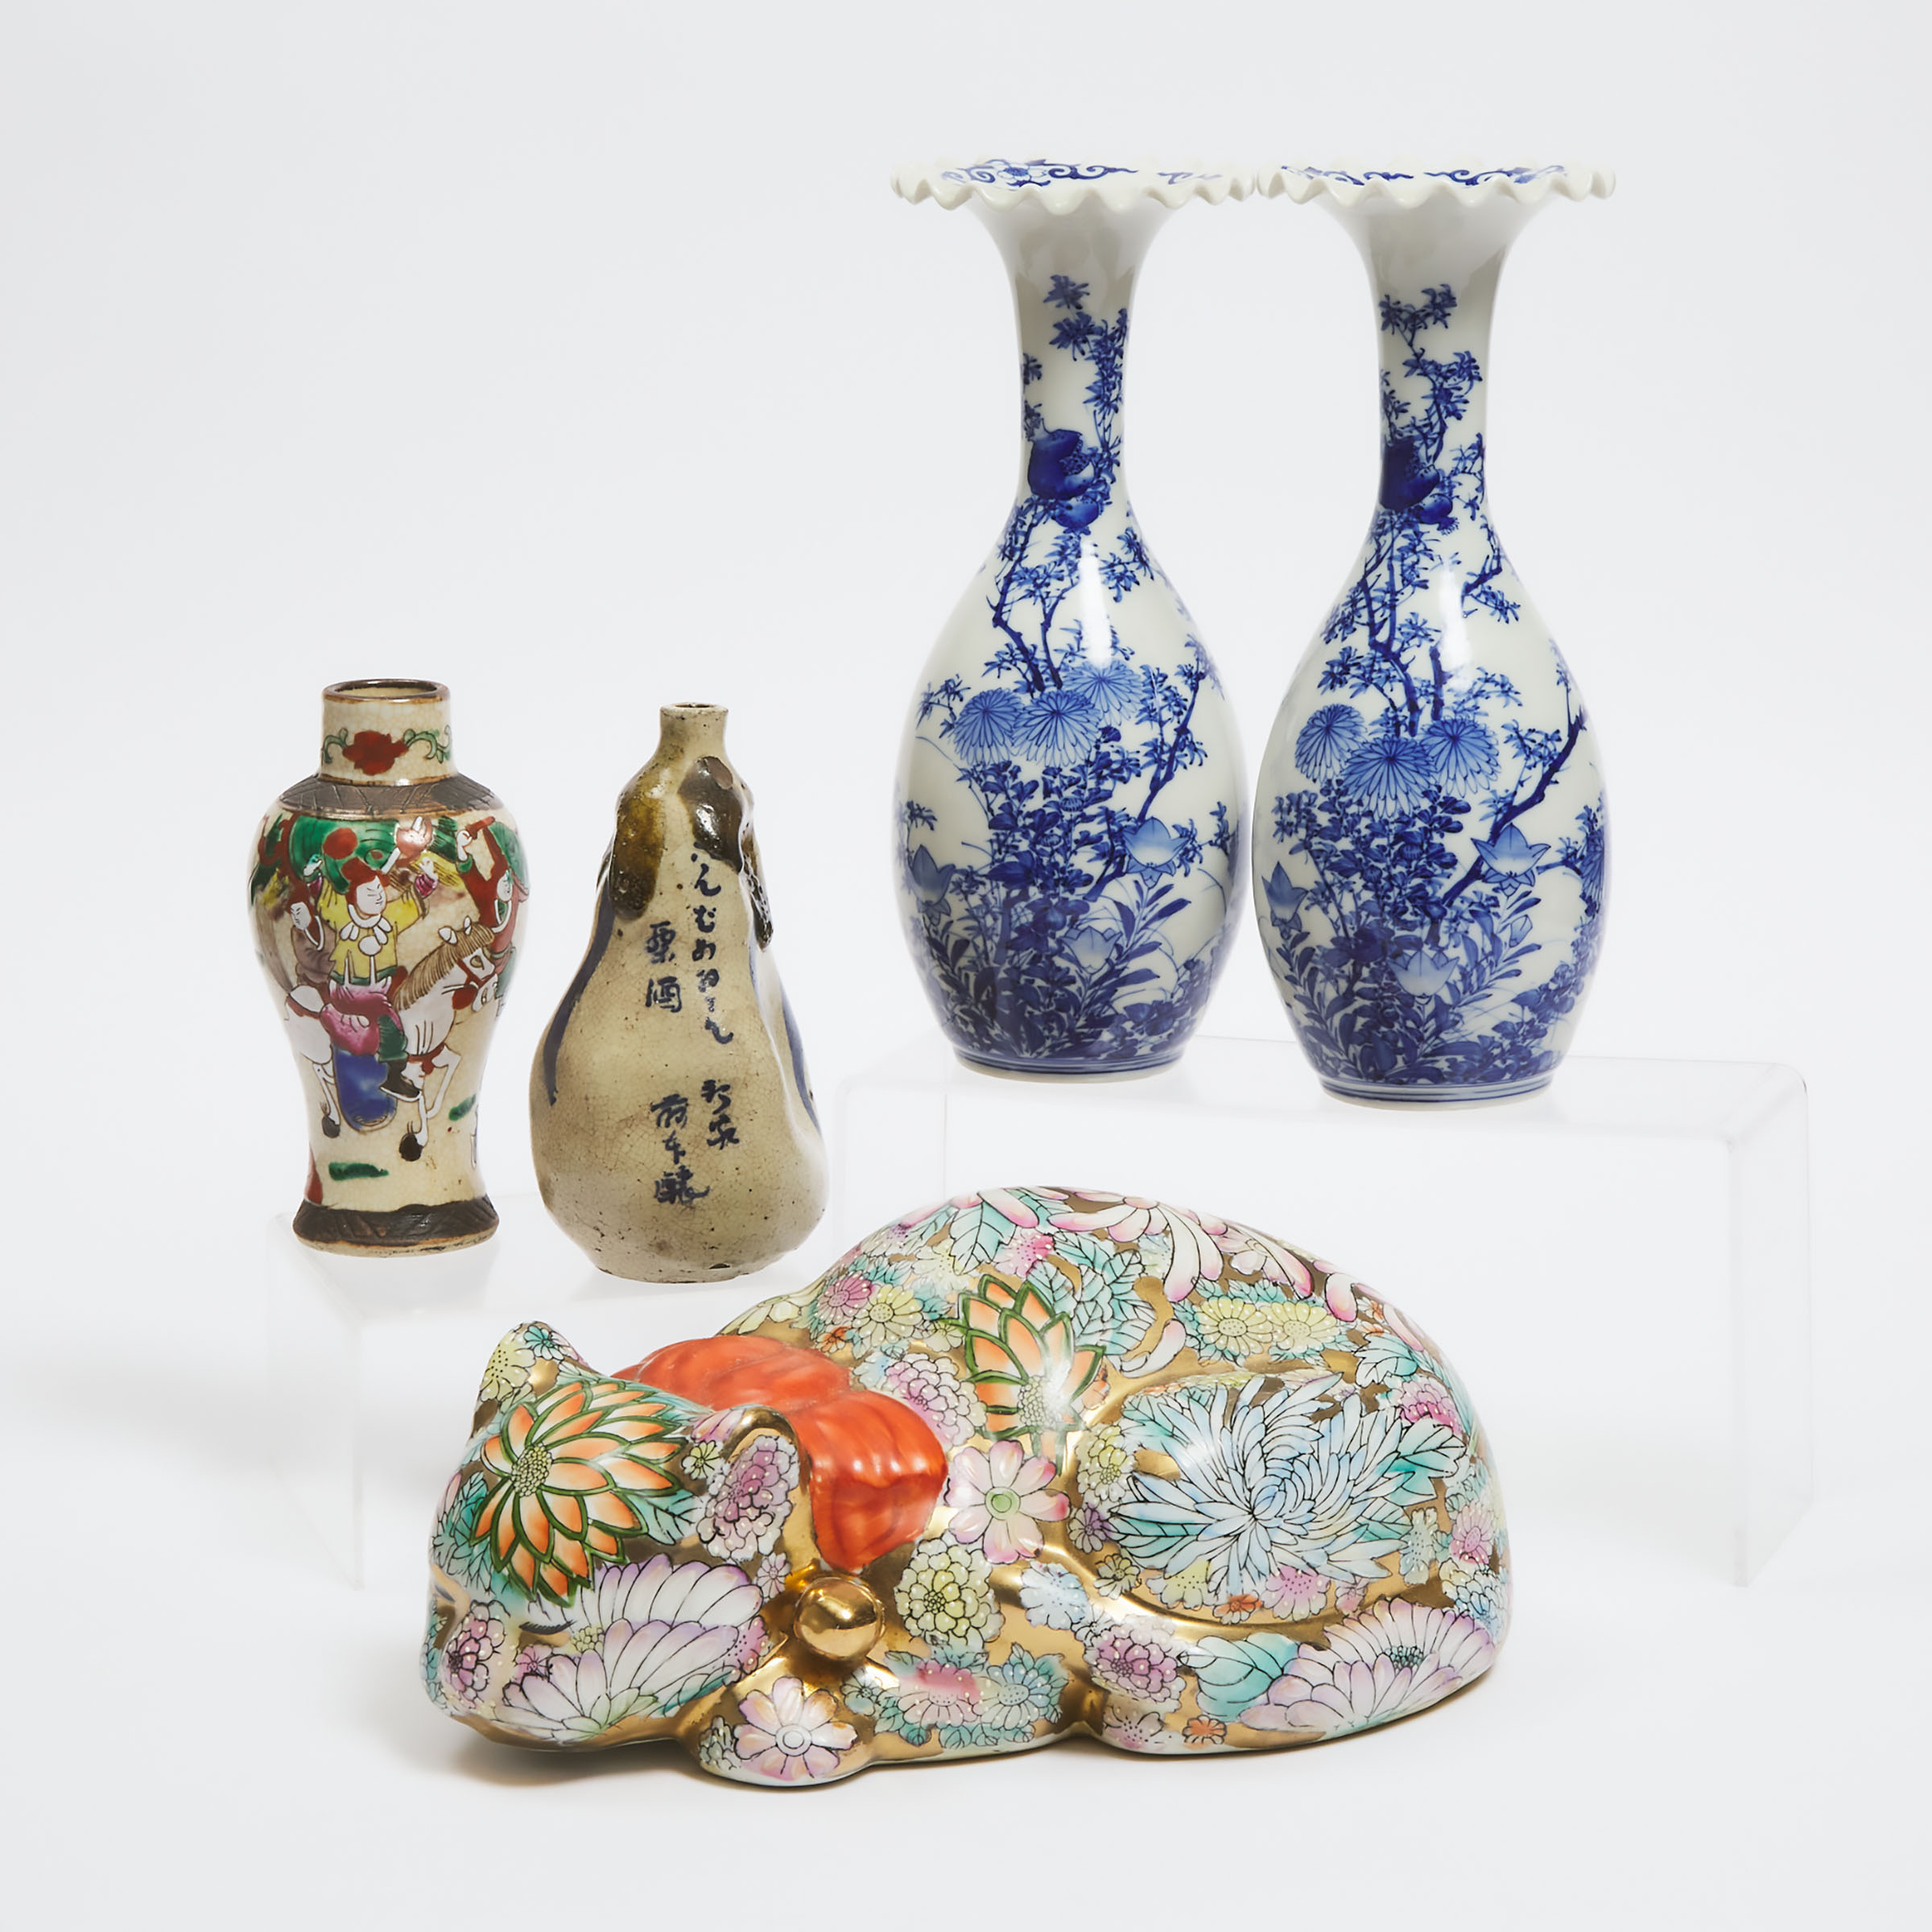 A Group of Five Ceramic Wares, 20th